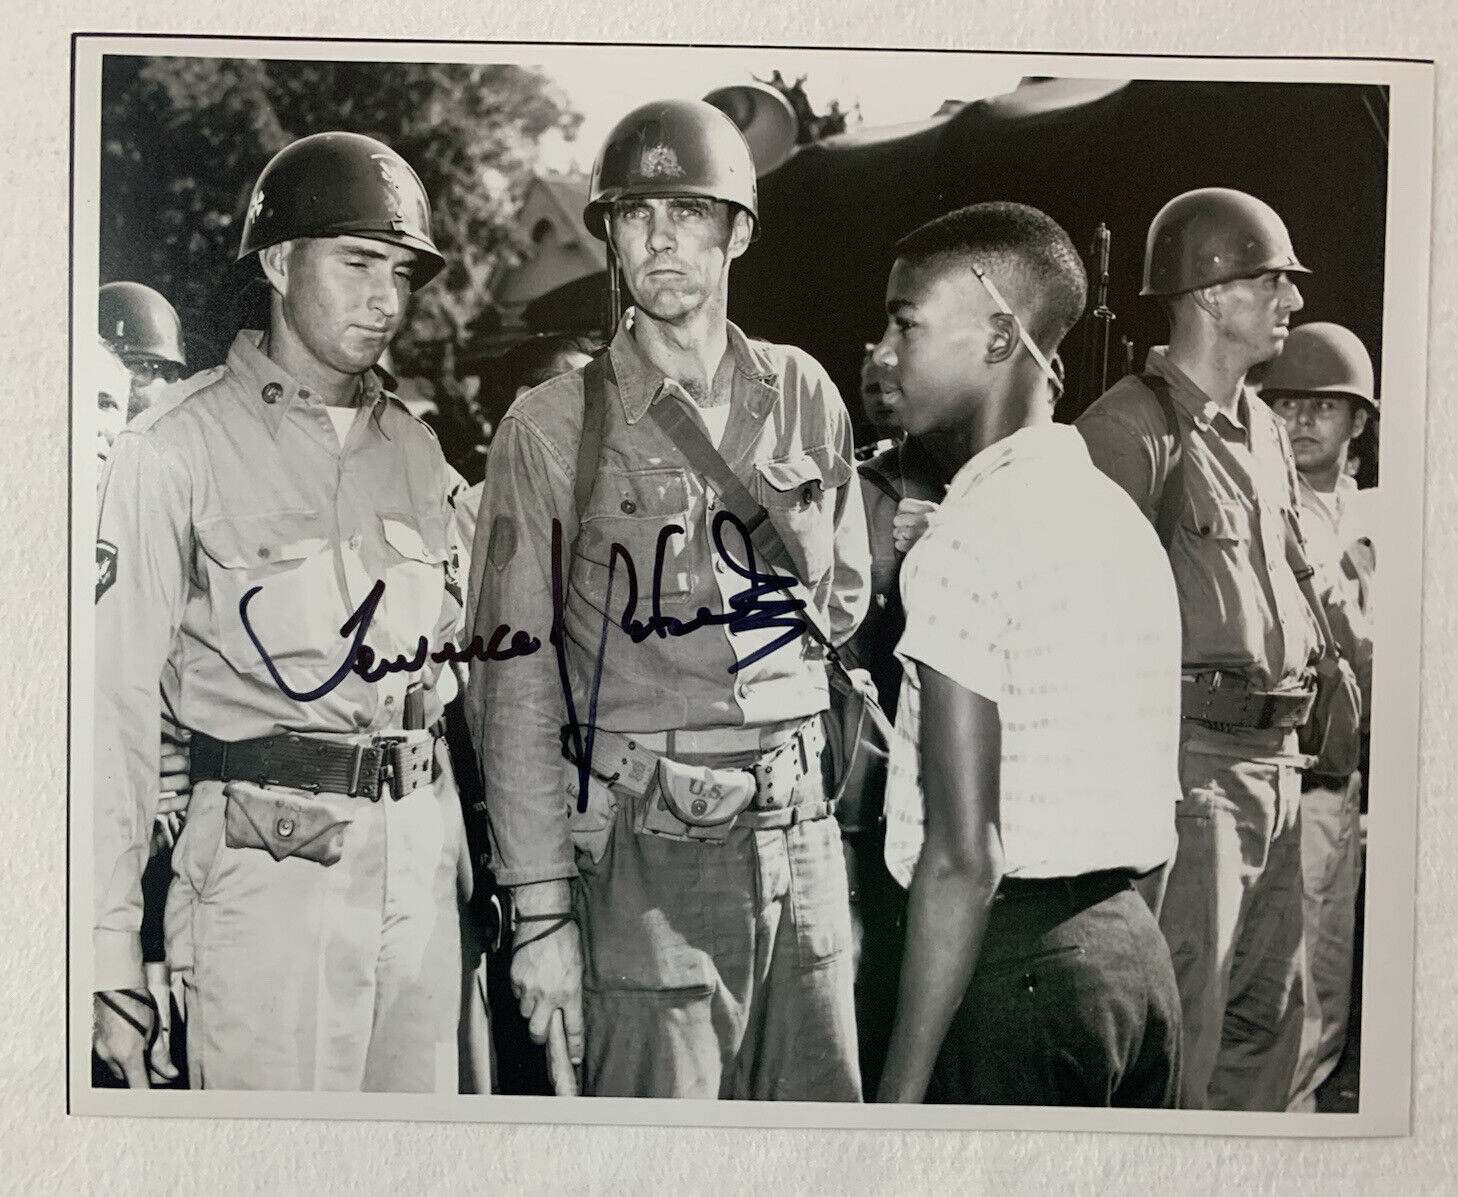 TERRENCE ROBERTS HAND SIGNED 8x10 Photo Poster painting LITTLE ROCK NINE AUTOGRAPH COA